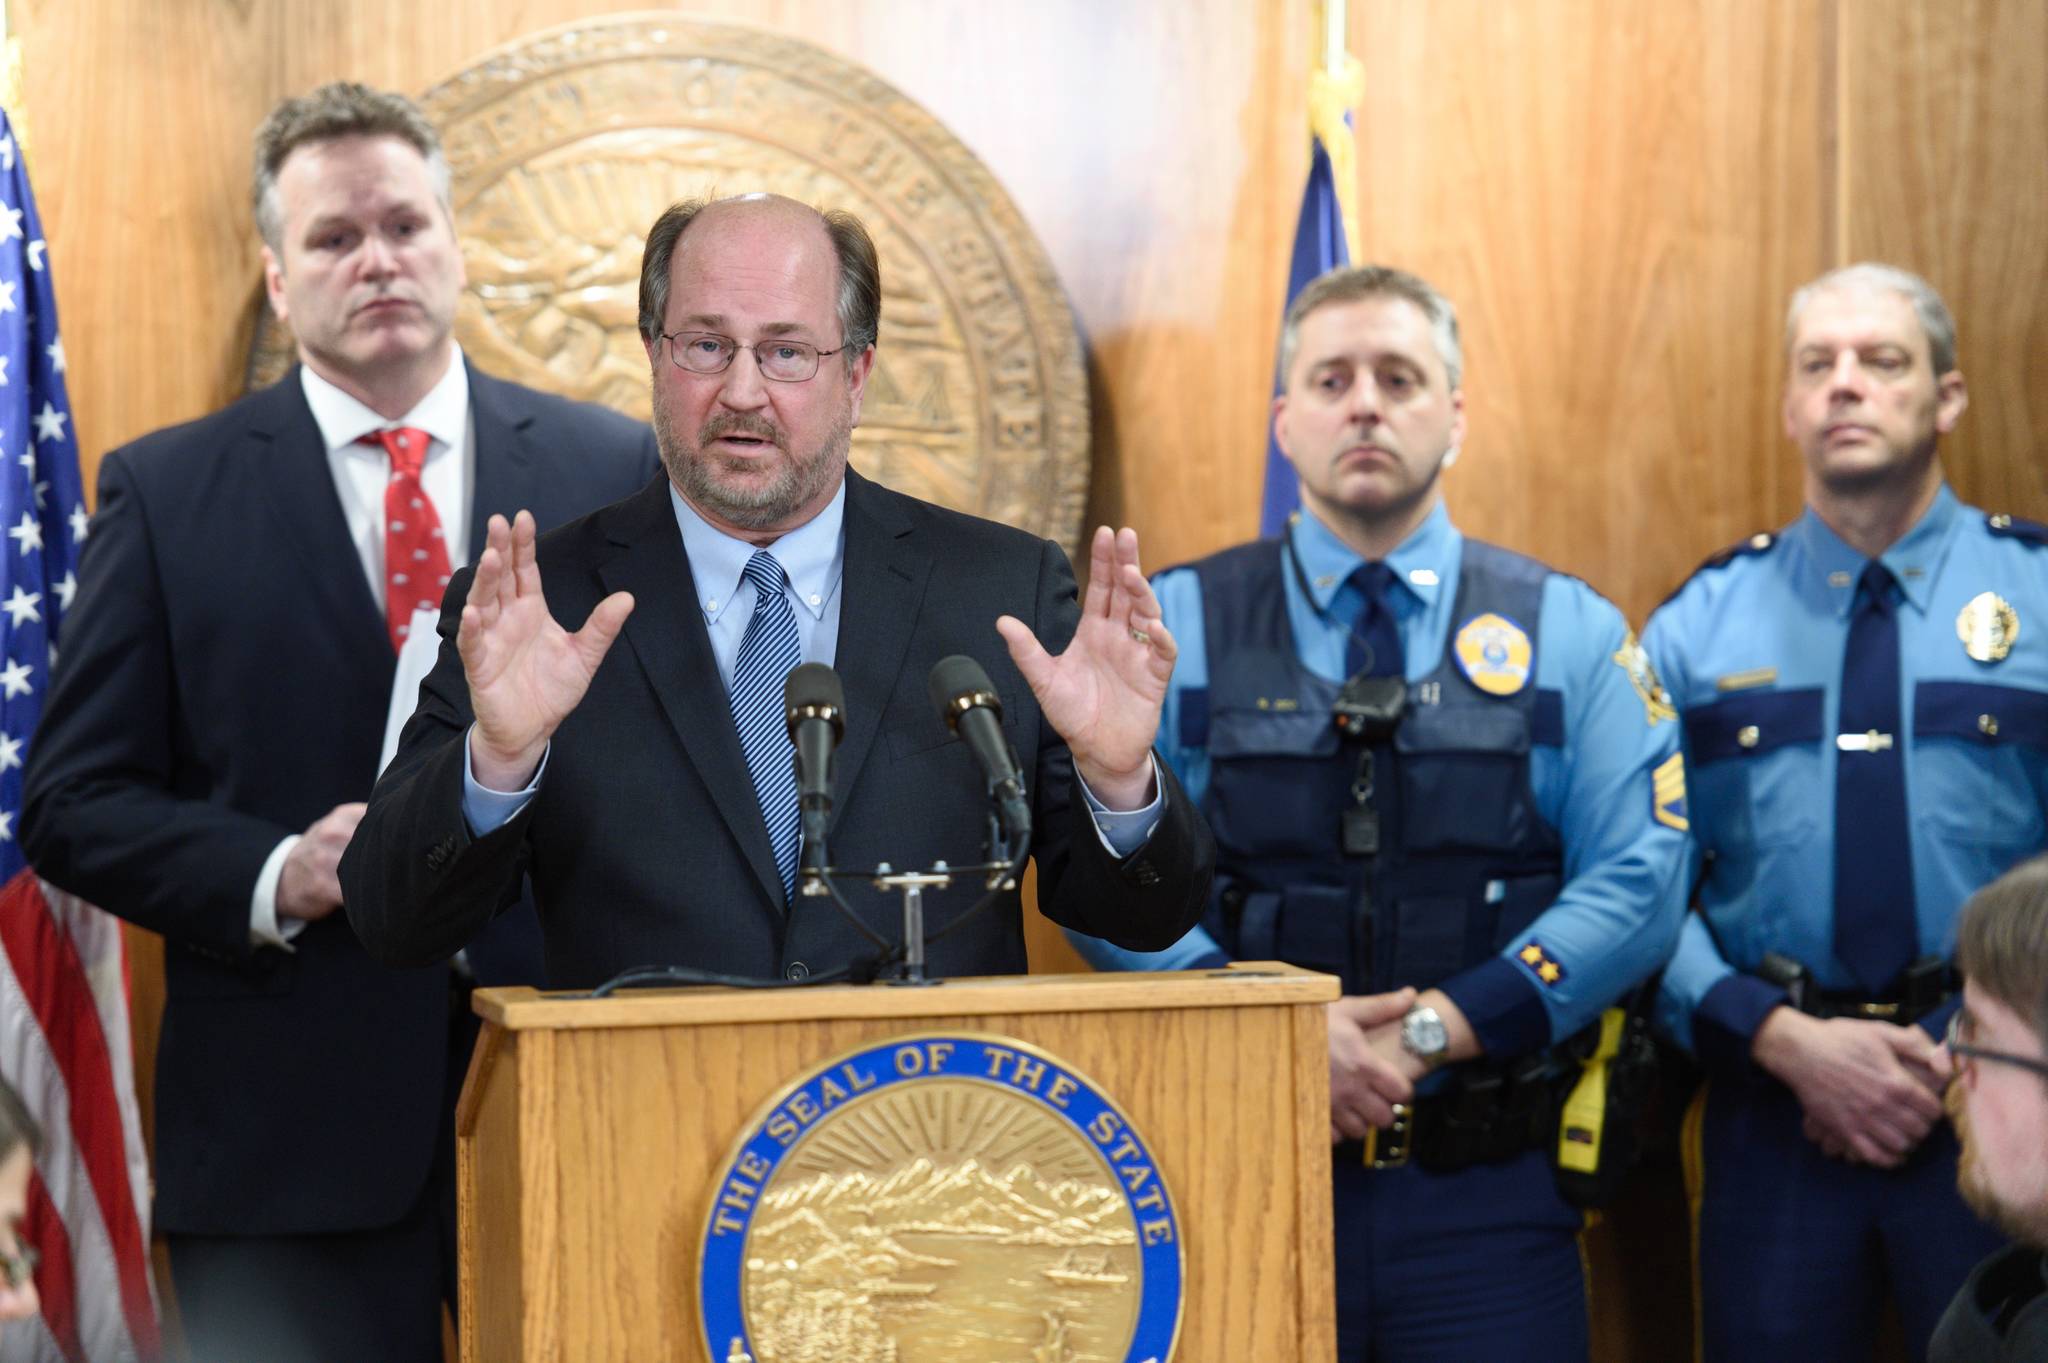 Alaska Attorney General Kevin Clarkson describes four new crimes bills at a press conference with Gov. Mike Dunleavy, left, and Alaska State Troopers at the Capitol on Wednesday, Jan. 23, 2019. (Michael Penn | Juneau Empire)